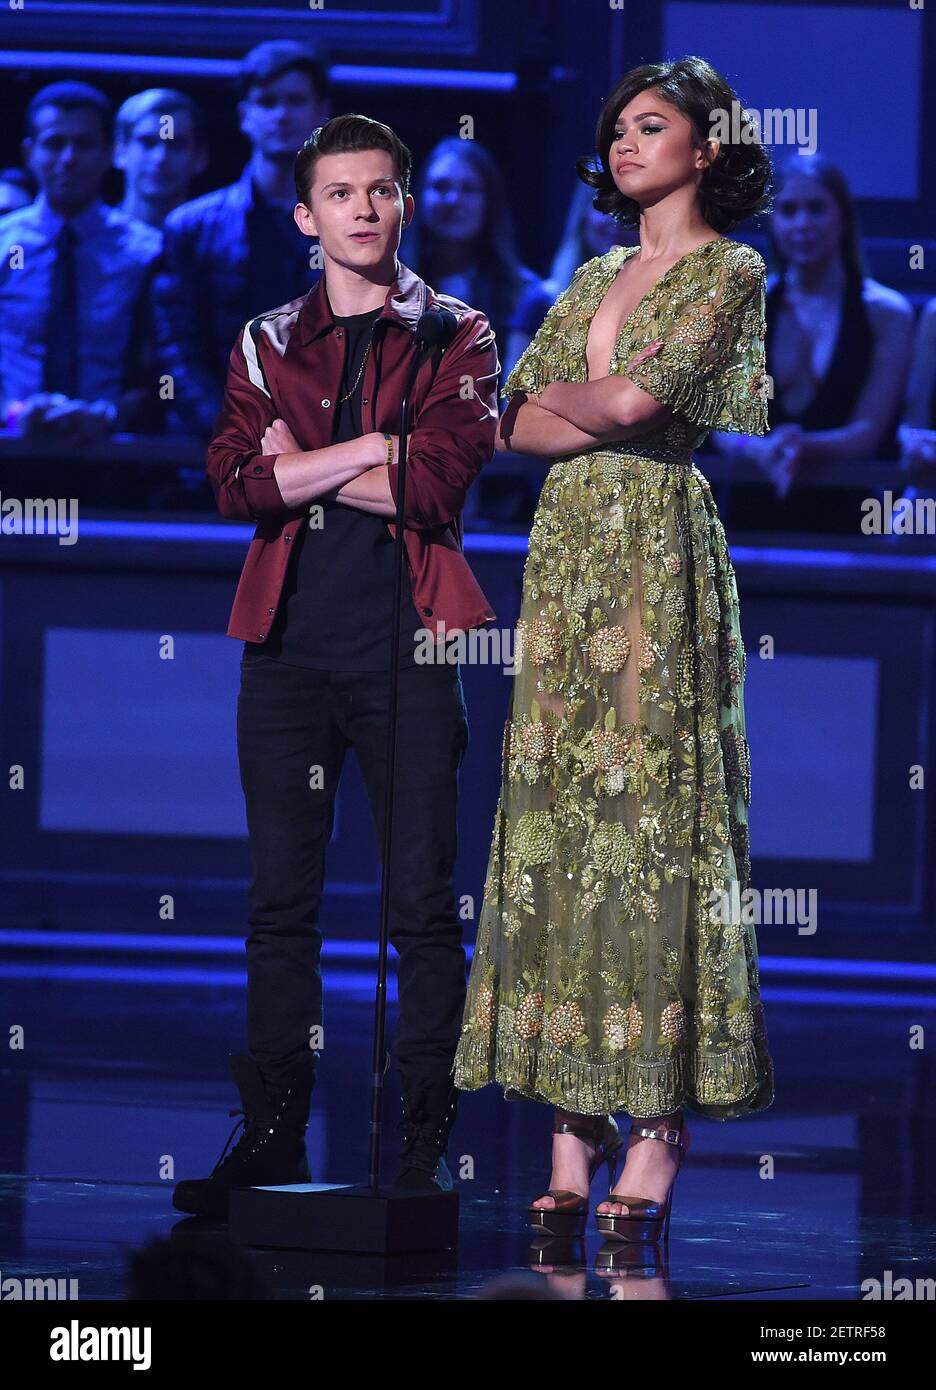 LOS ANGELES, CA - May 7: Tom Holland and Zendaya appear on the 2017 MTV ...